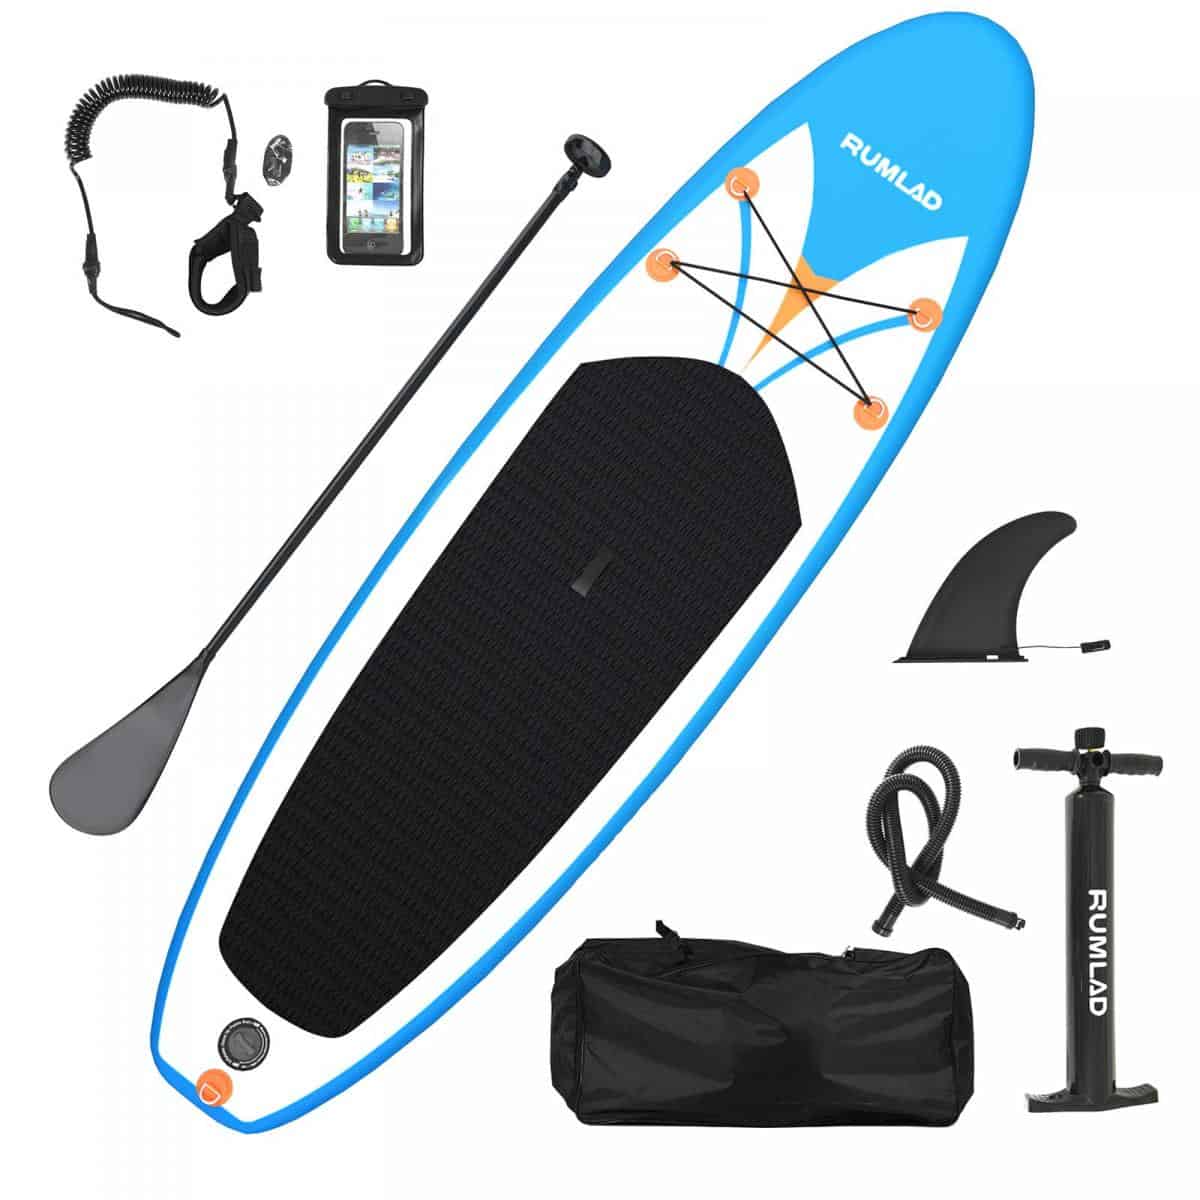 Rumland Inflatable Stand Up Paddle Board Review